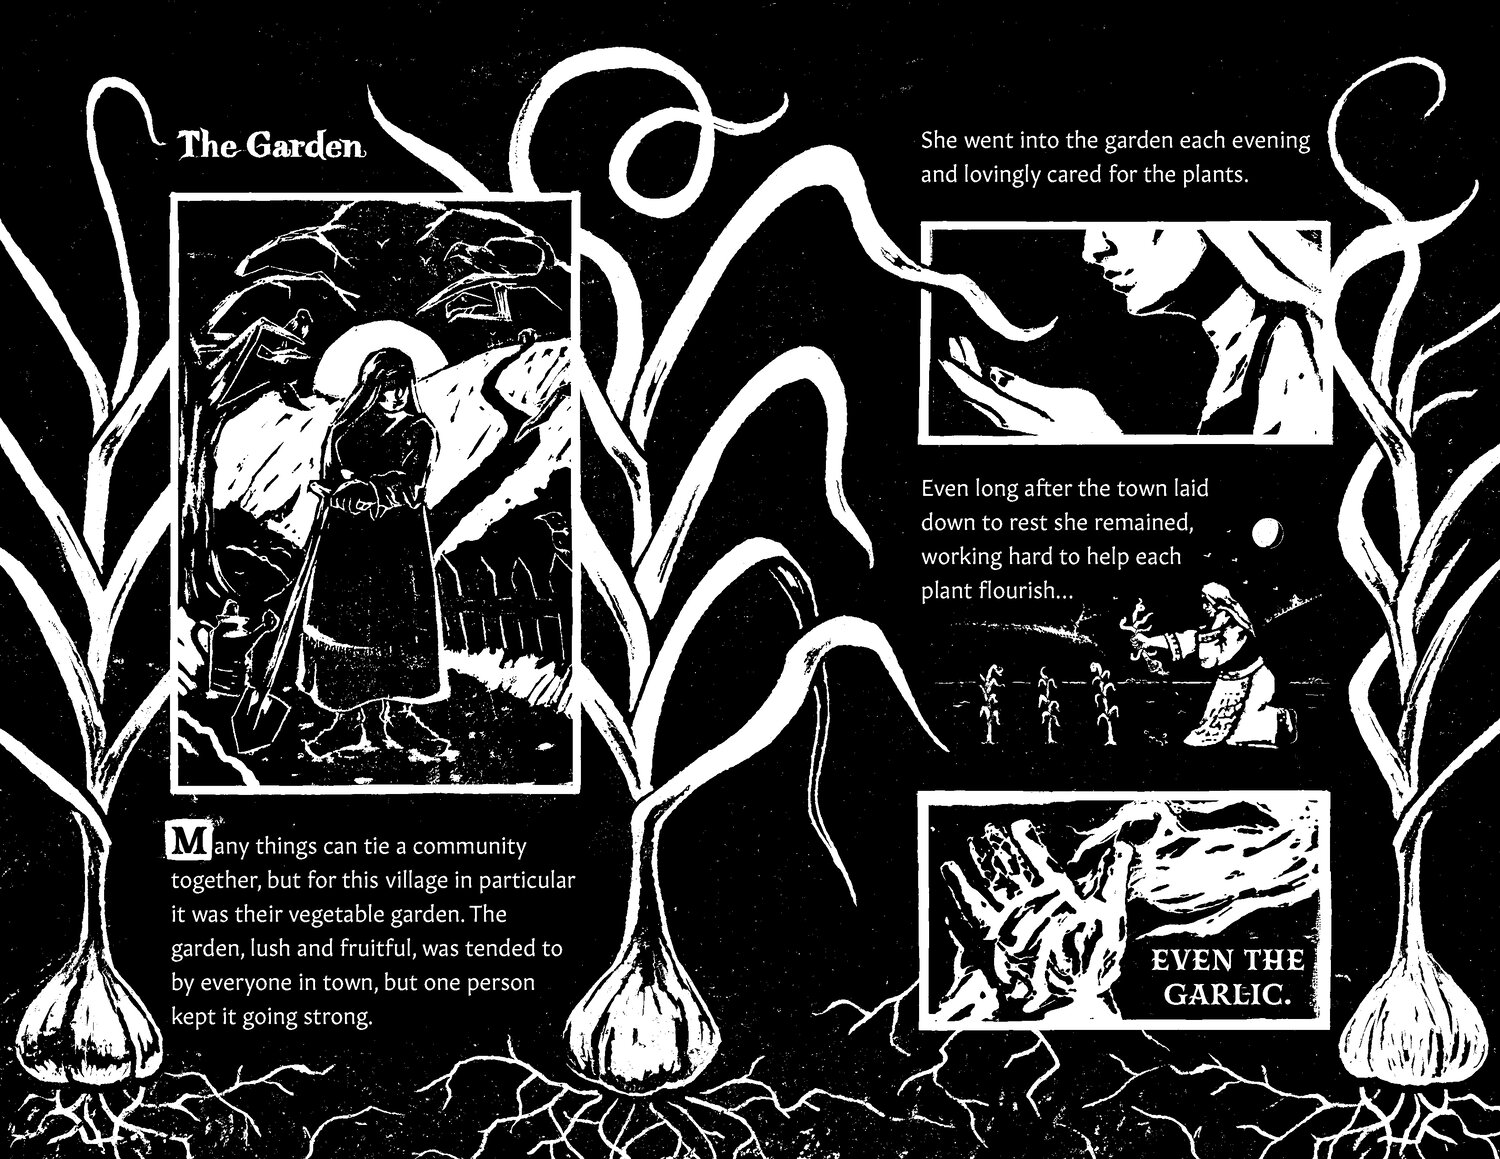 A black and white illustrated page from Vampthology, the vampire-inspired zine made by Eric Clift-Thompson. The illustrations show three garlic plants with shoots and roots in the background, with figurative drawings spread across the page that is titled "The Garden." The first drawing is of a person, holding a shovel with one hand, in their garden with a farm field and the sun setting at a distance. The other drawings that follow depict the person gardening and harvesting the garlic, and holding it in their hands. The text reads: "Many things can tie a community together, but for this village in particular it was their vegetable garden. The garden, lush and fruitful, was tended to by everyone in town, but one person kept it going strong. She went into the garden each evening and lovingly cared for the plants. Even long after the town laid down to rest she remained, working hard to help each plant flourish... even the garlic."